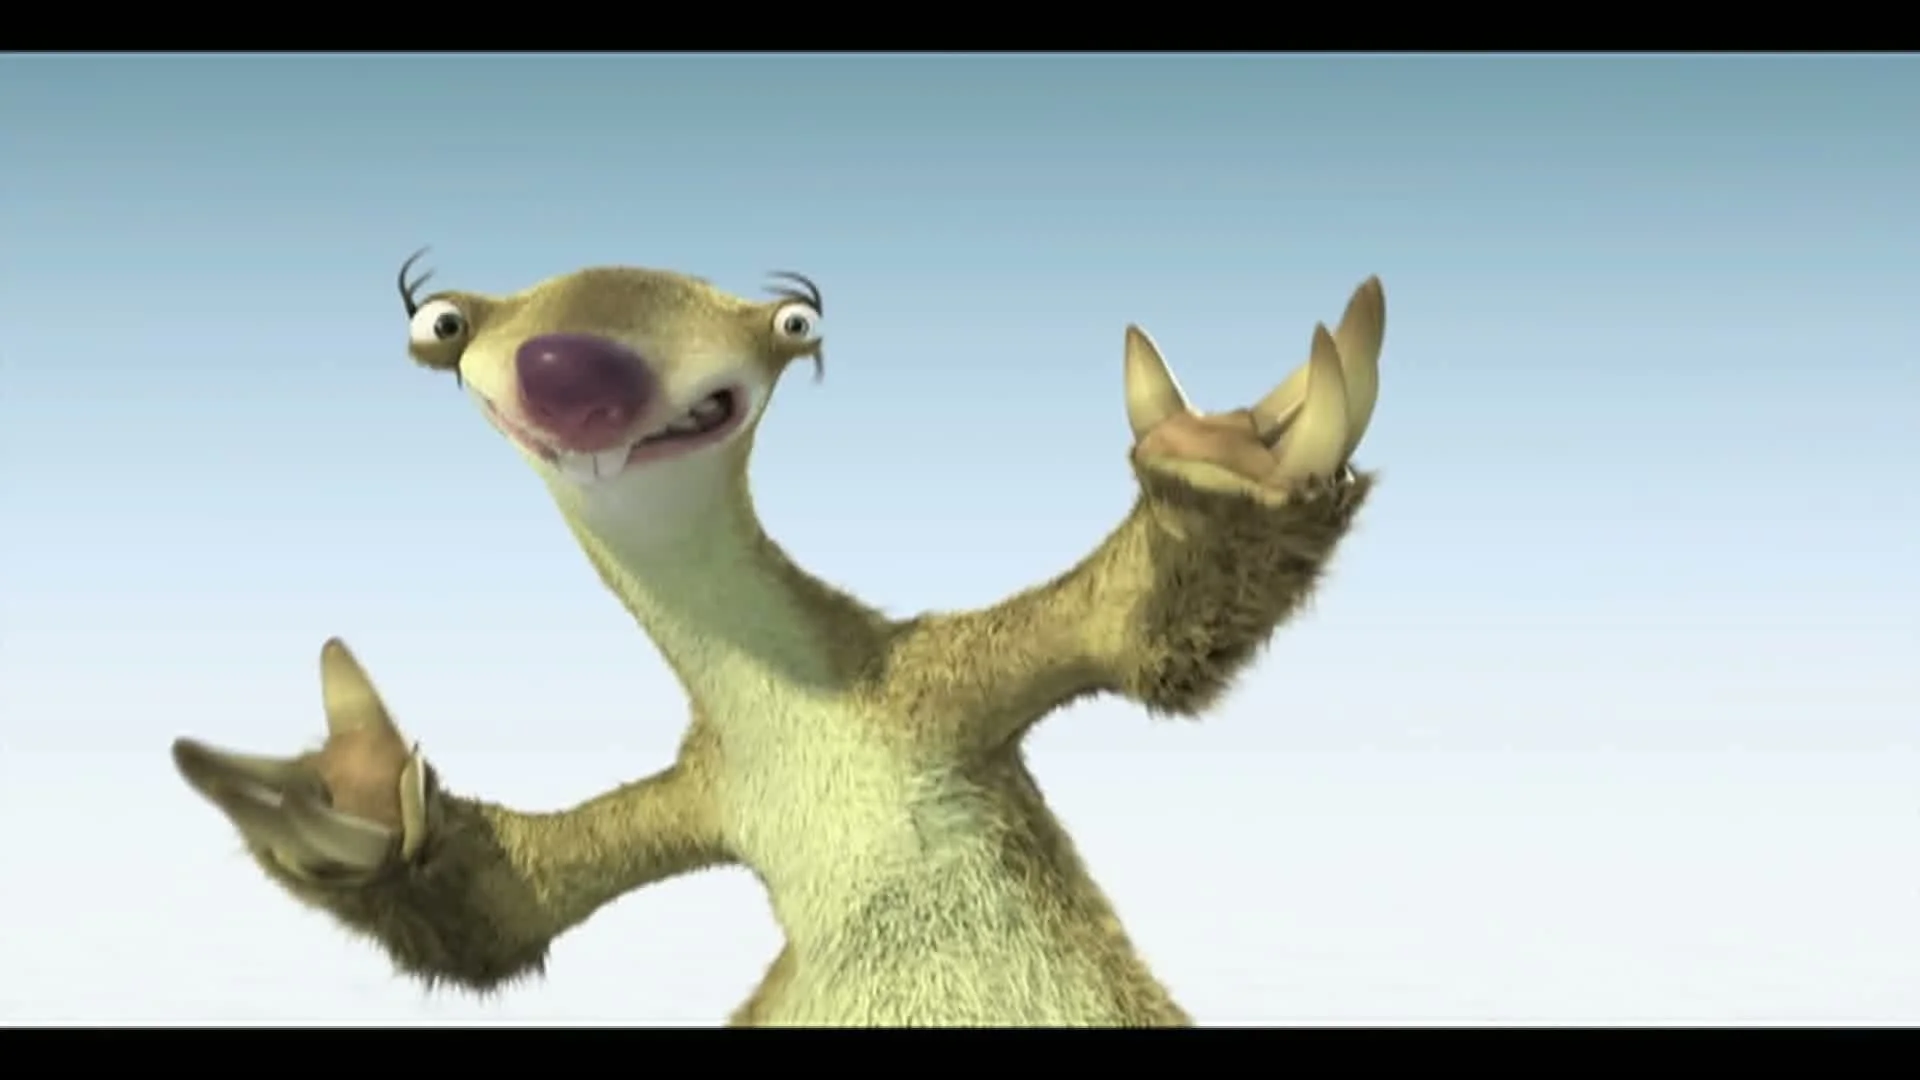 Ice Age: Sid images Sid Shuffle HD wallpaper and background photos